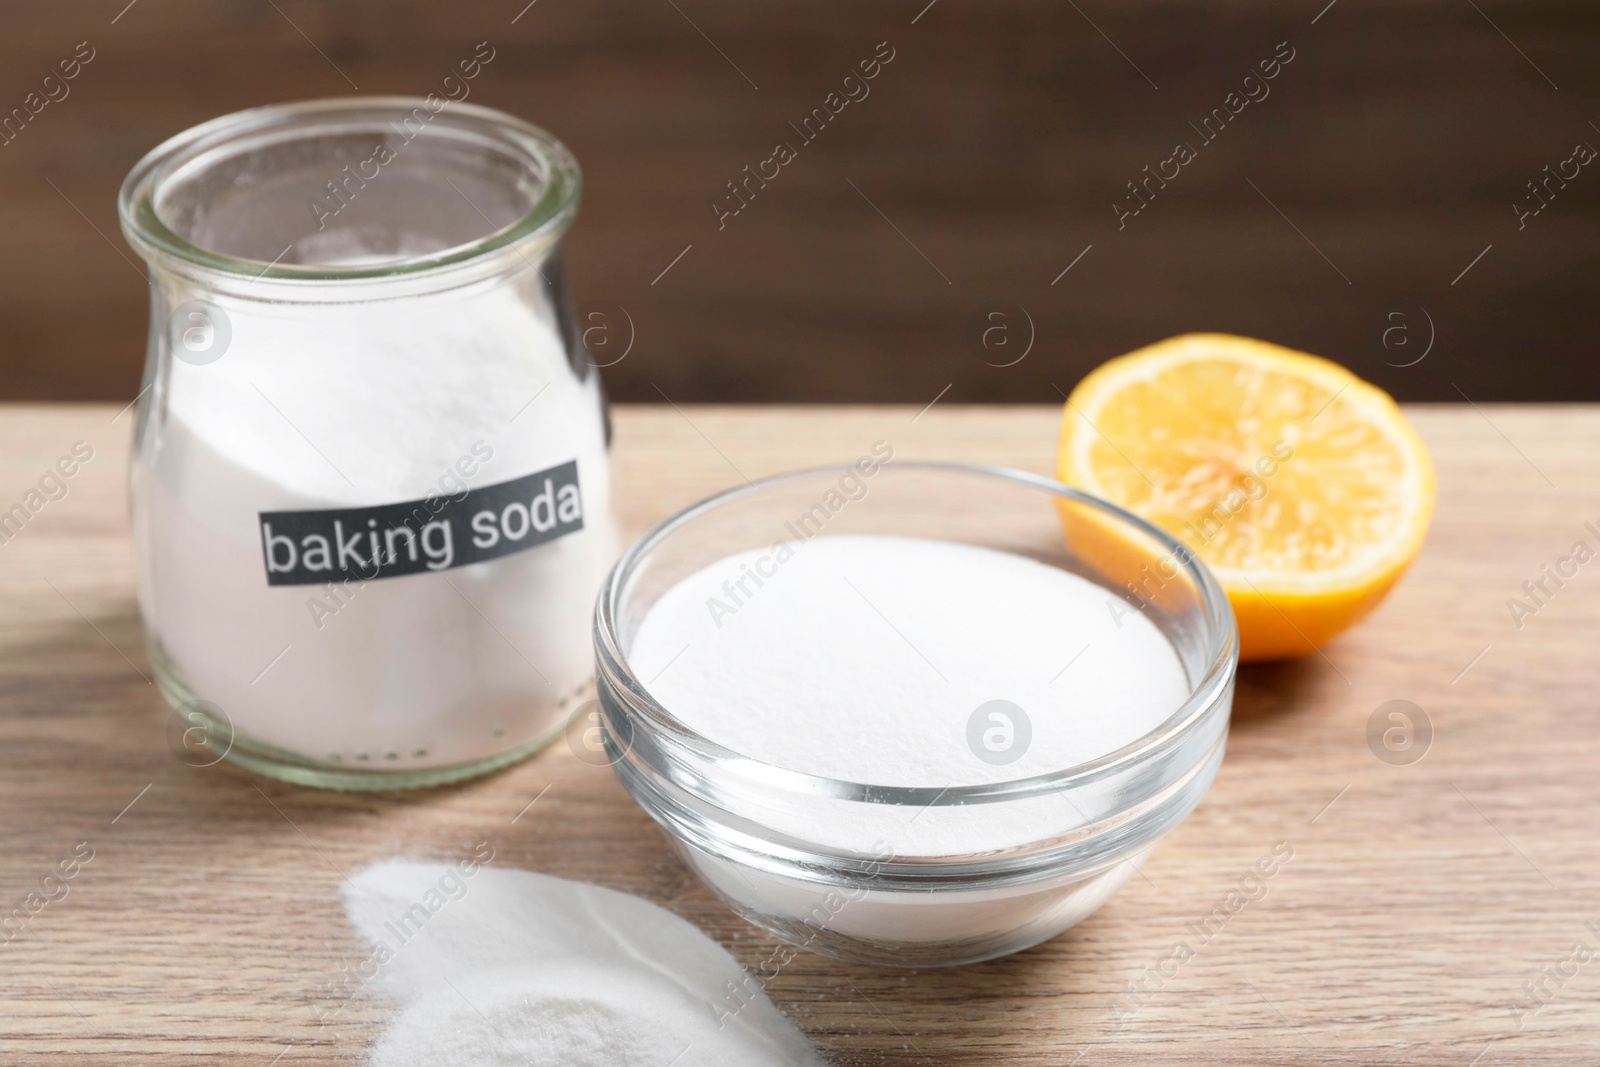 Photo of Baking soda and lemon on wooden table